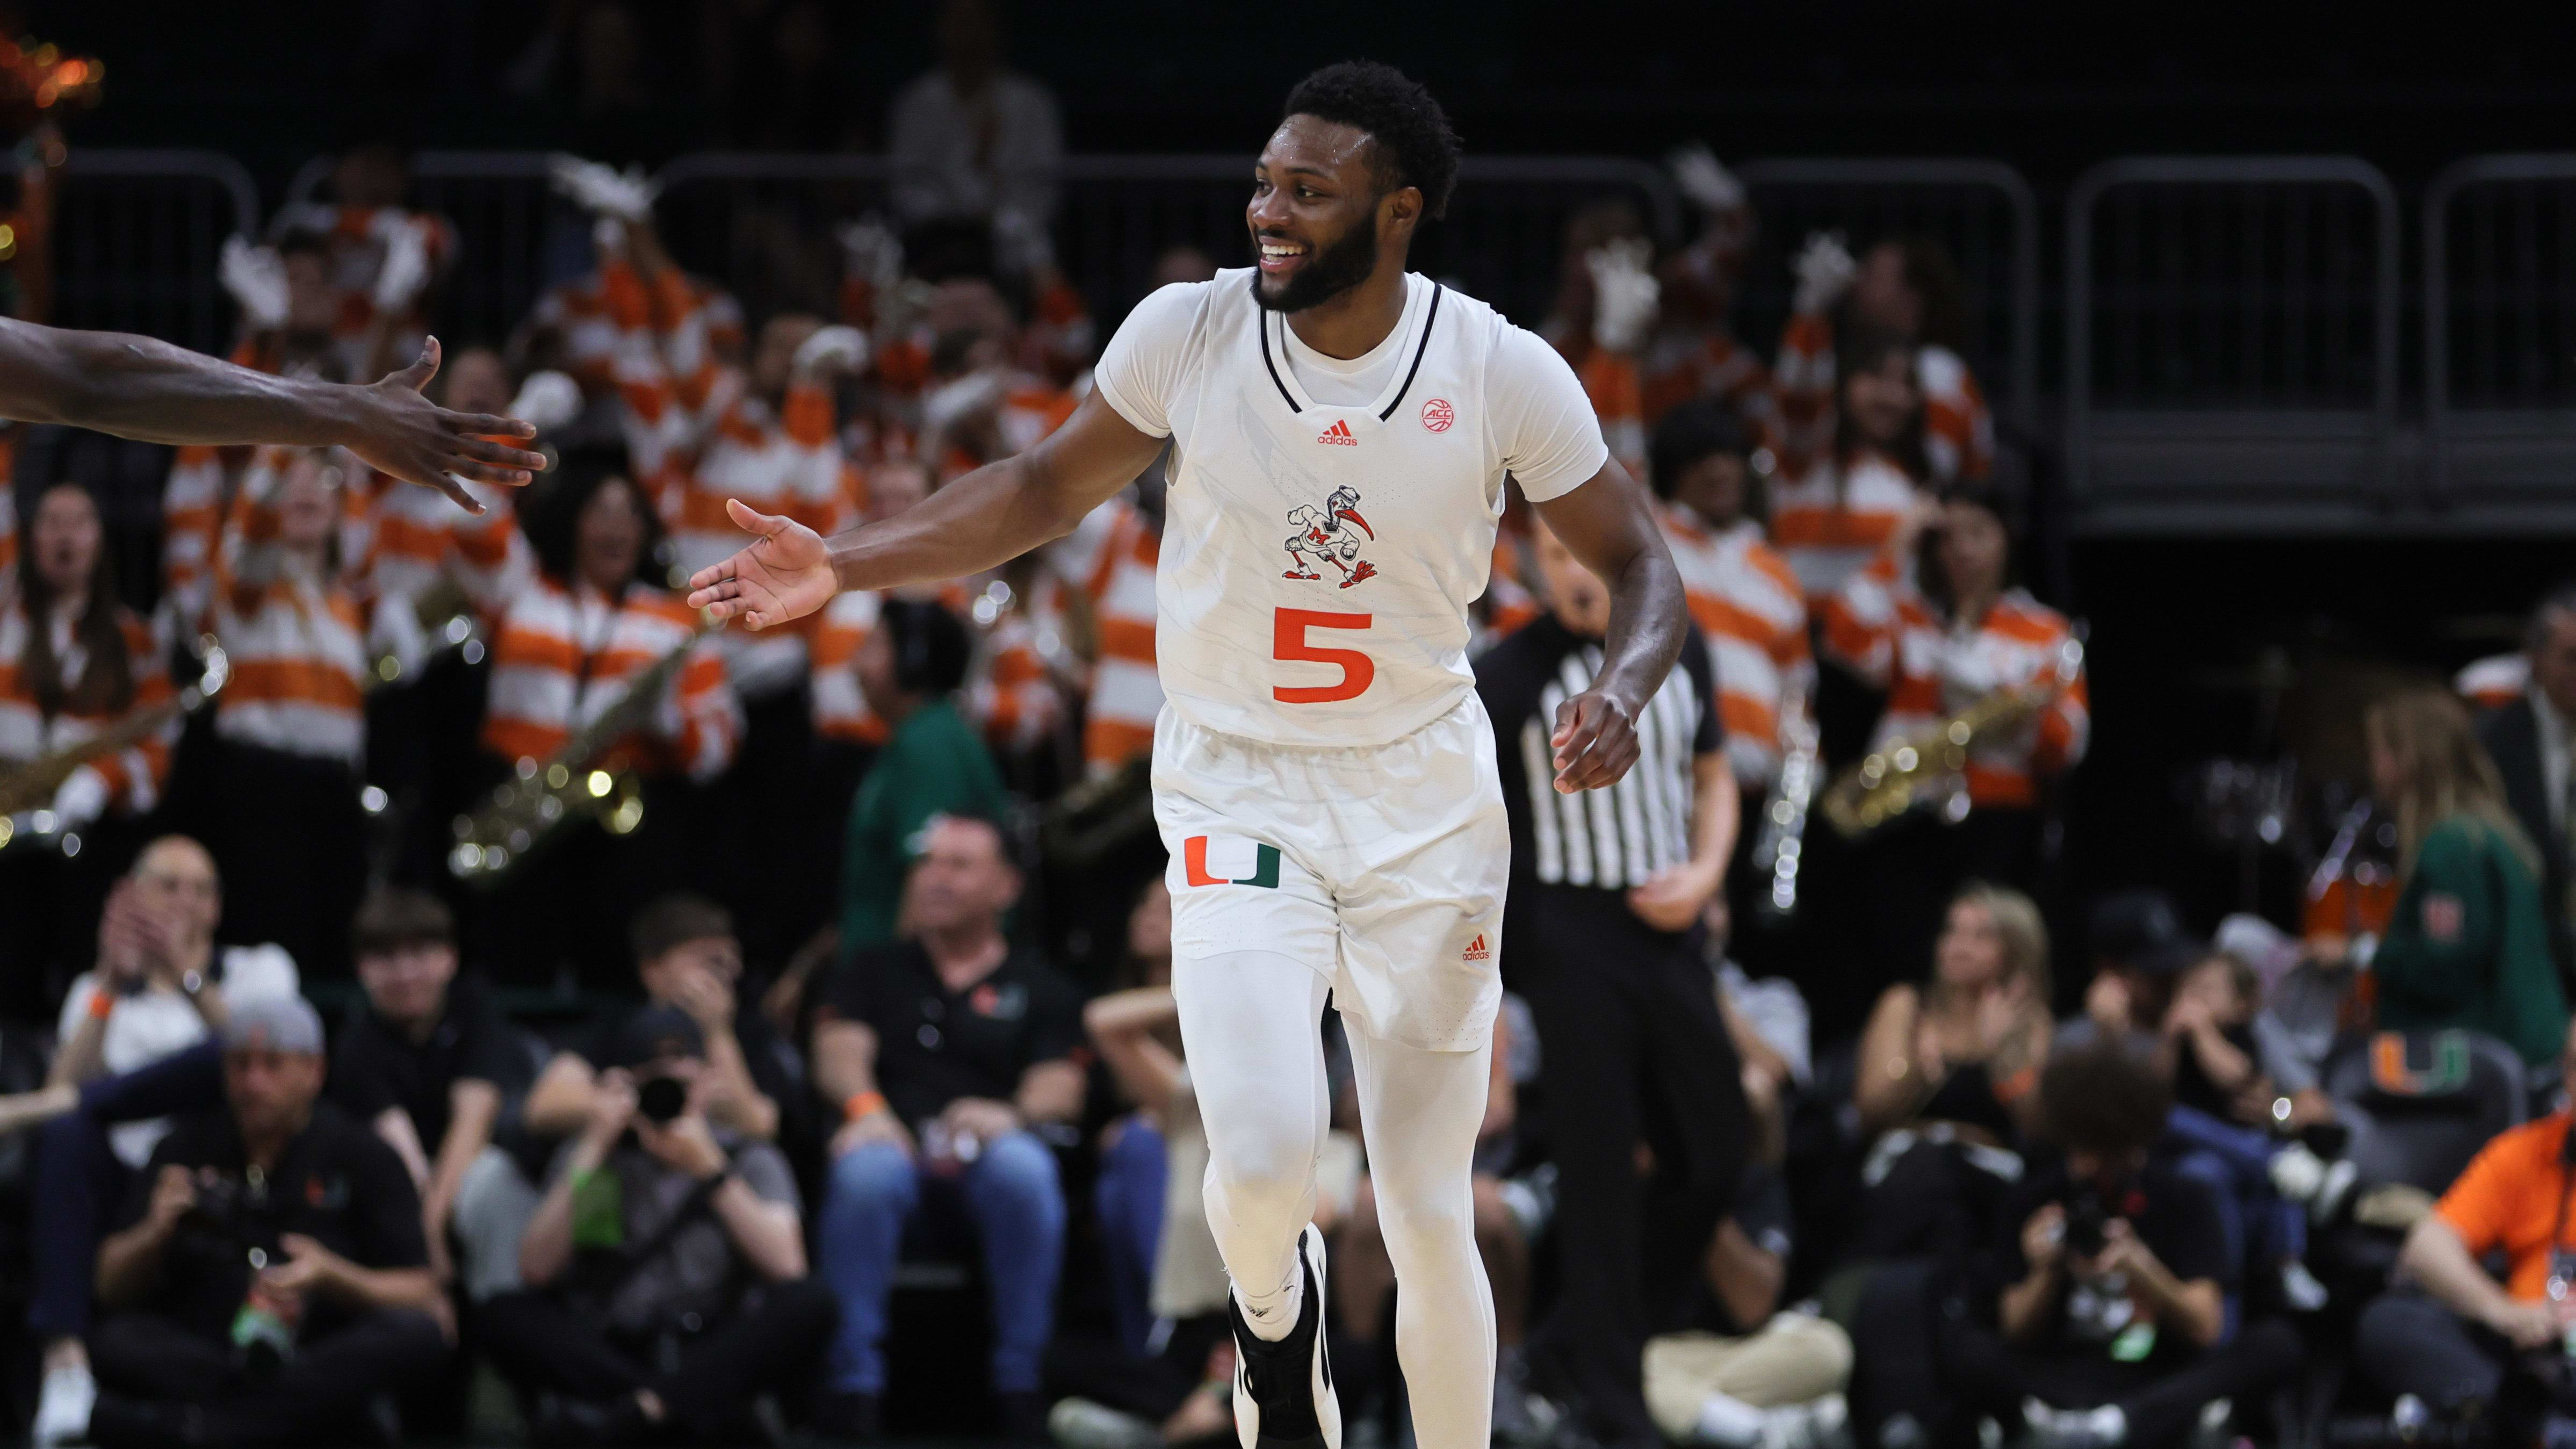 Kentucky reaches out to former Miami Hurricane in the transfer portal